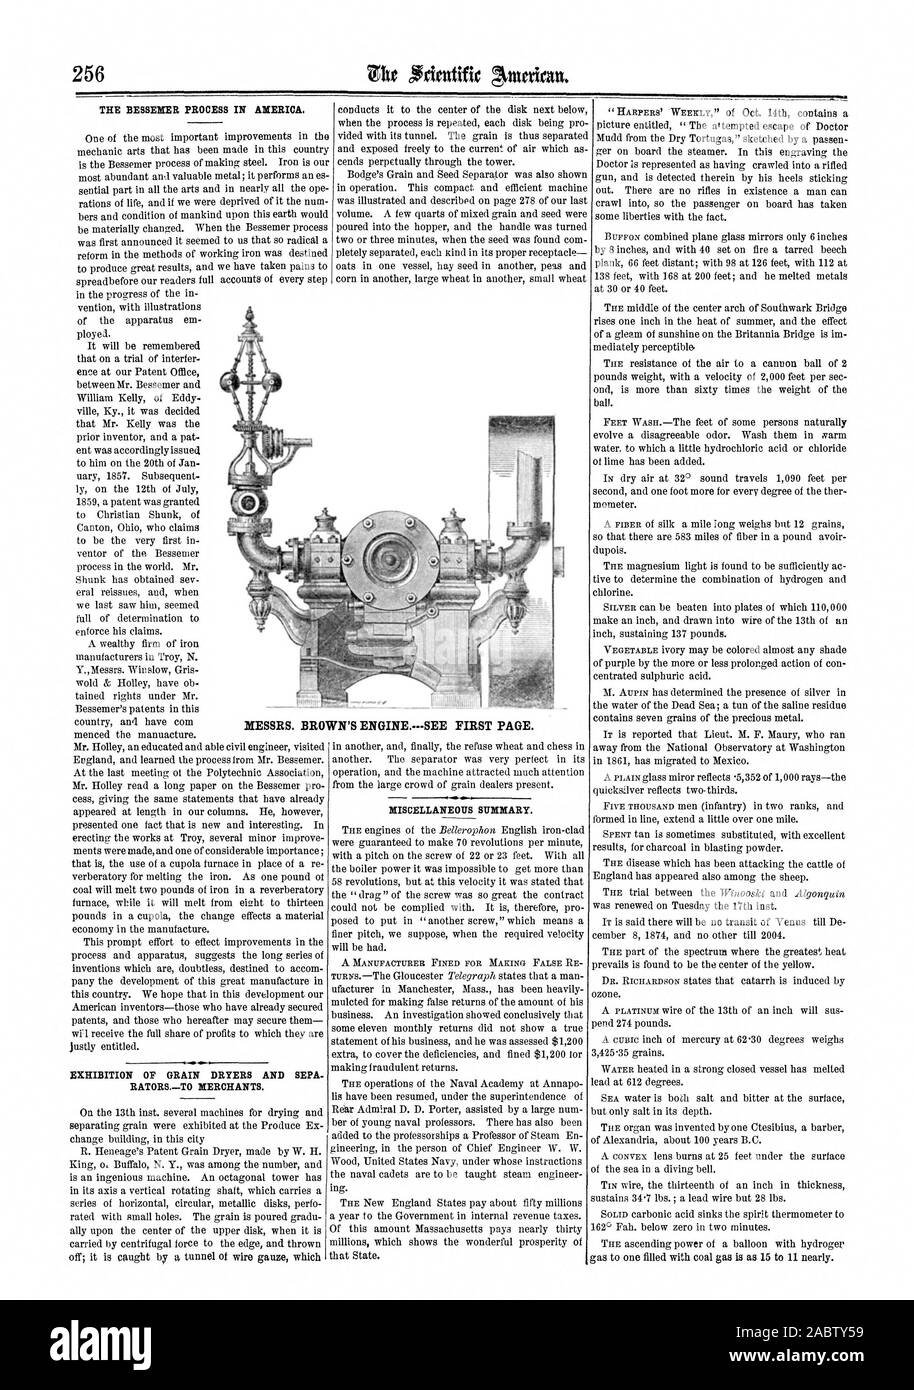 MESSRS. BROWN'S ENGINE.SEE FIRST PAGE., scientific american, 1865-10-21 Stock Photo